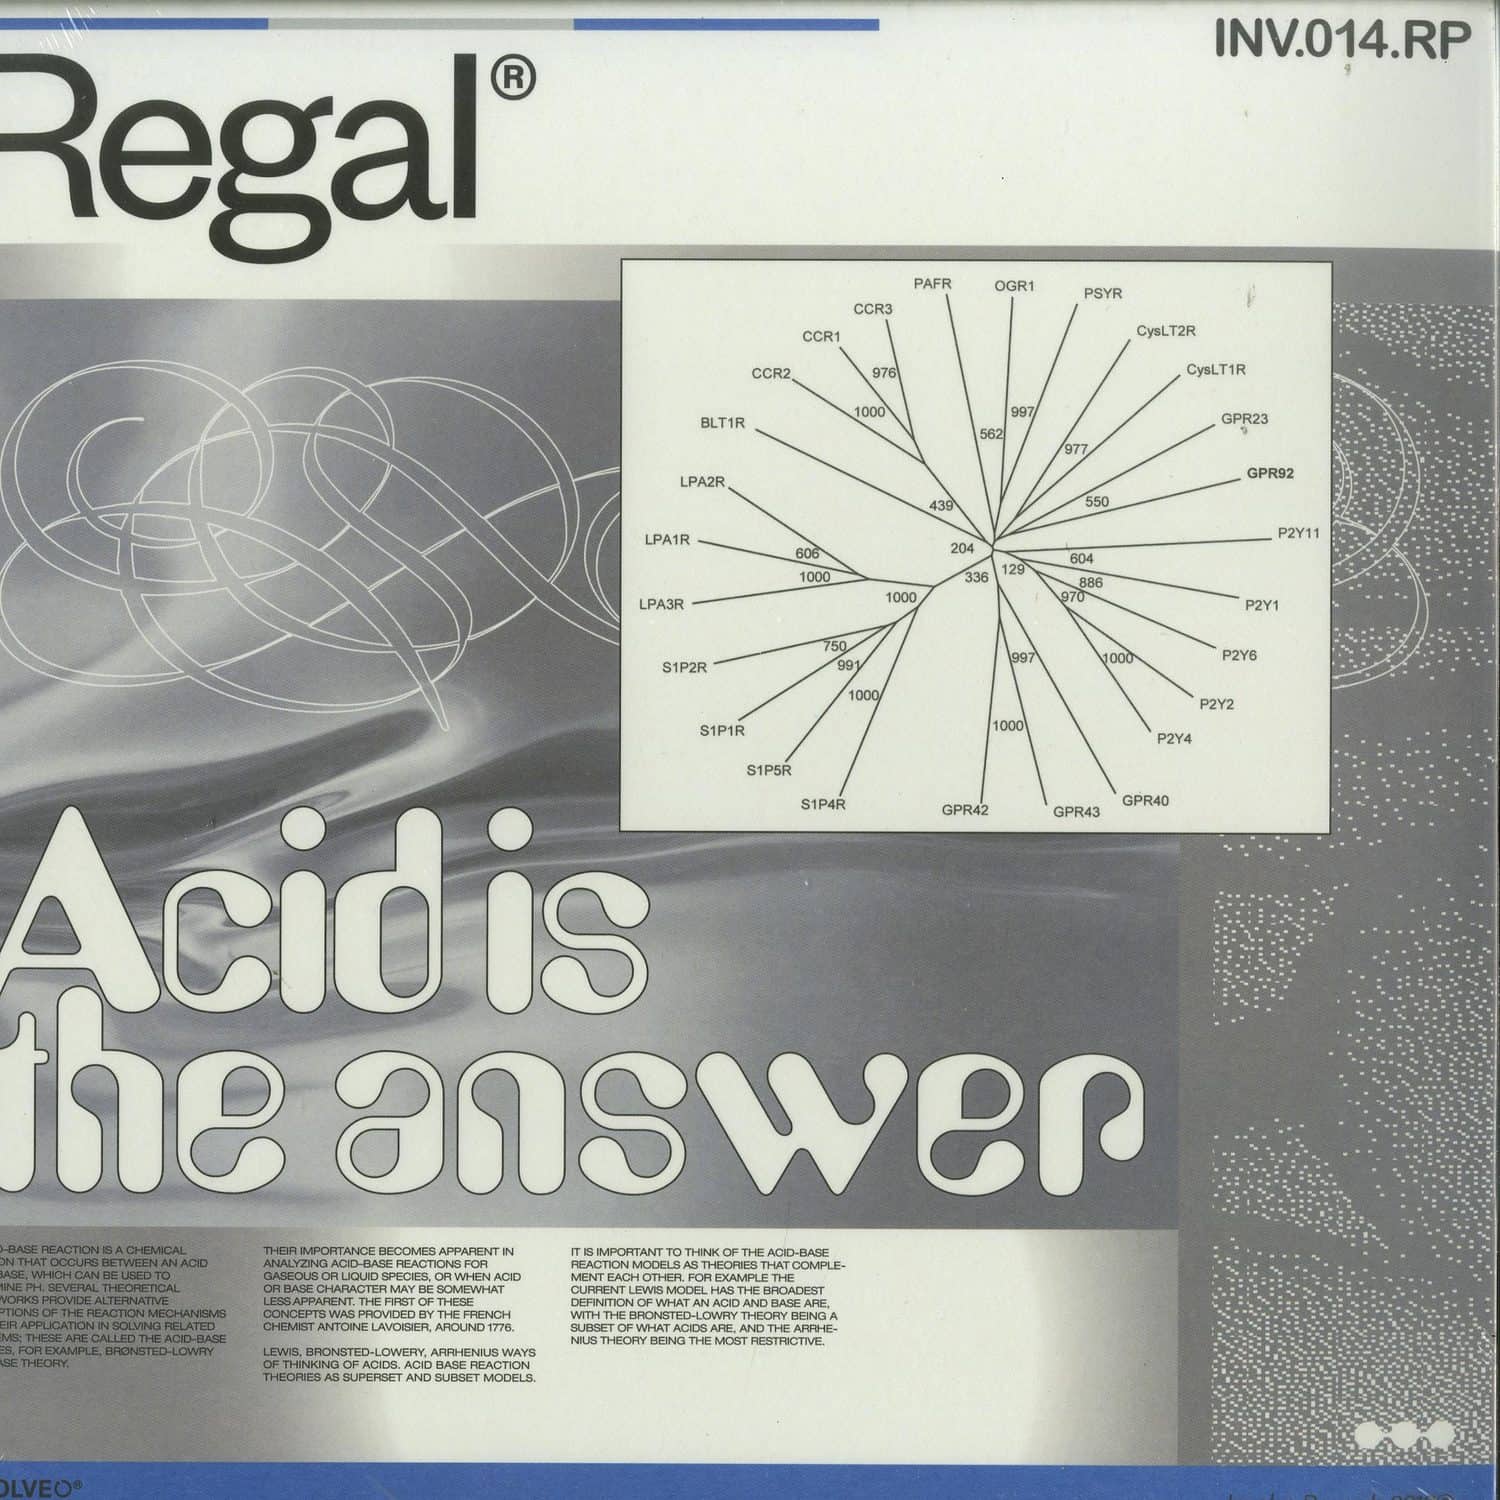 Regal - ACID IS THE ANSWER